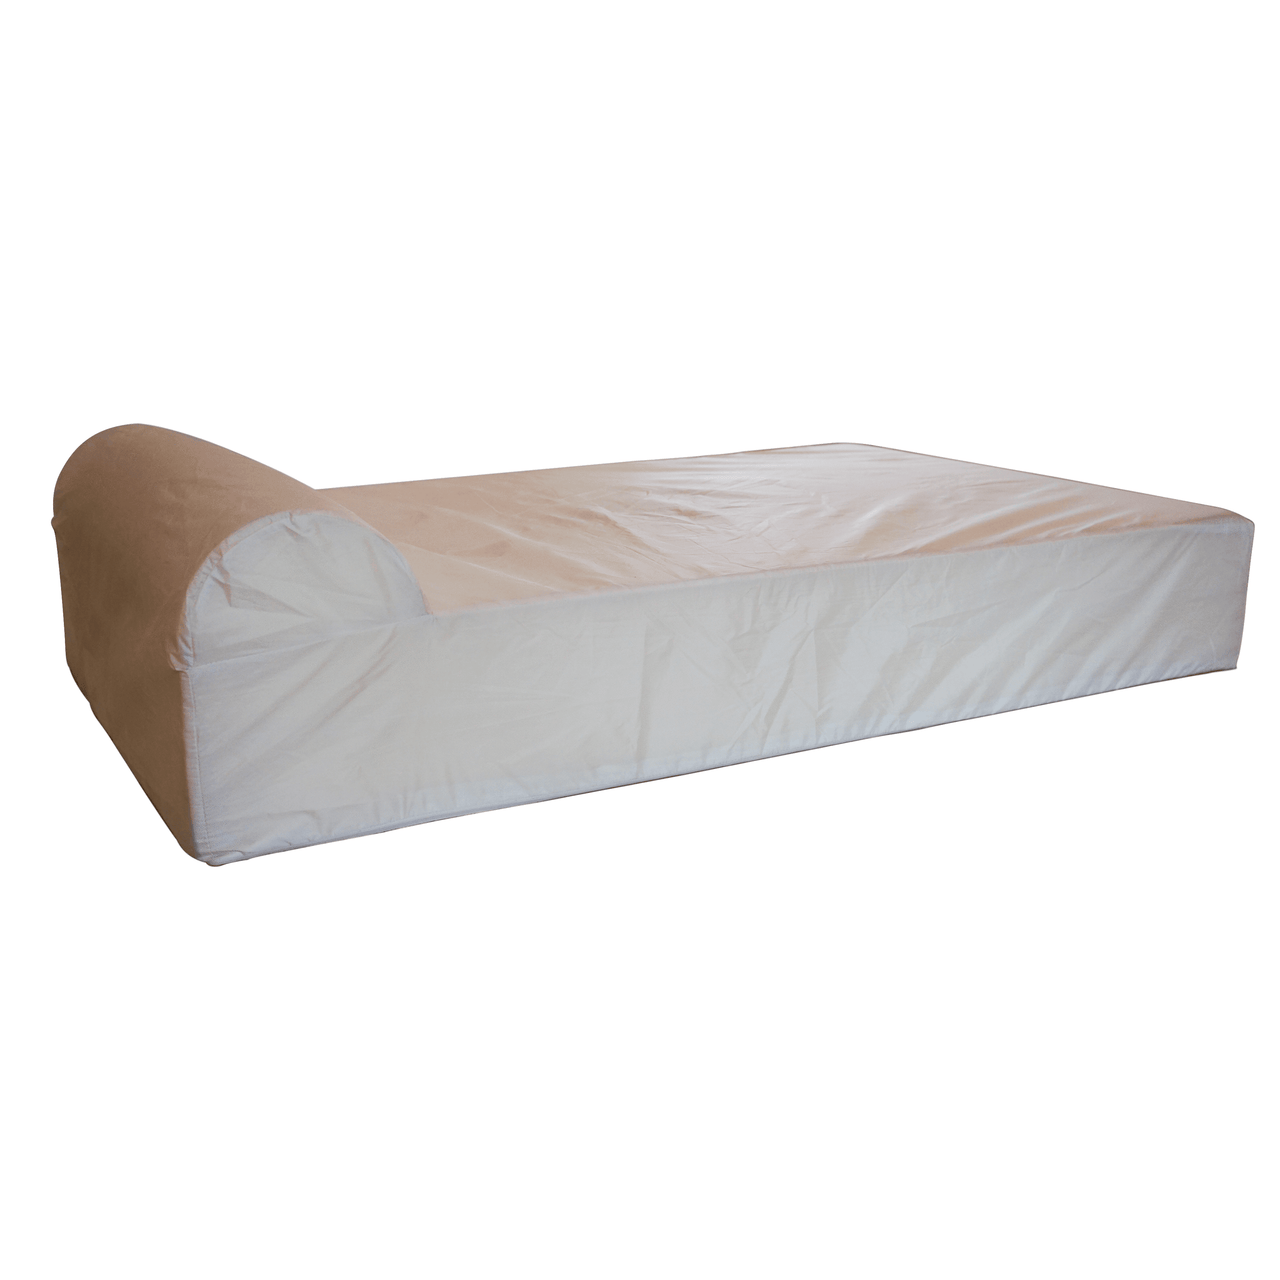 Waterproof Internal Liner Designer Bed Covers in Chocolate, Sage or Gray Bullybeds.com 